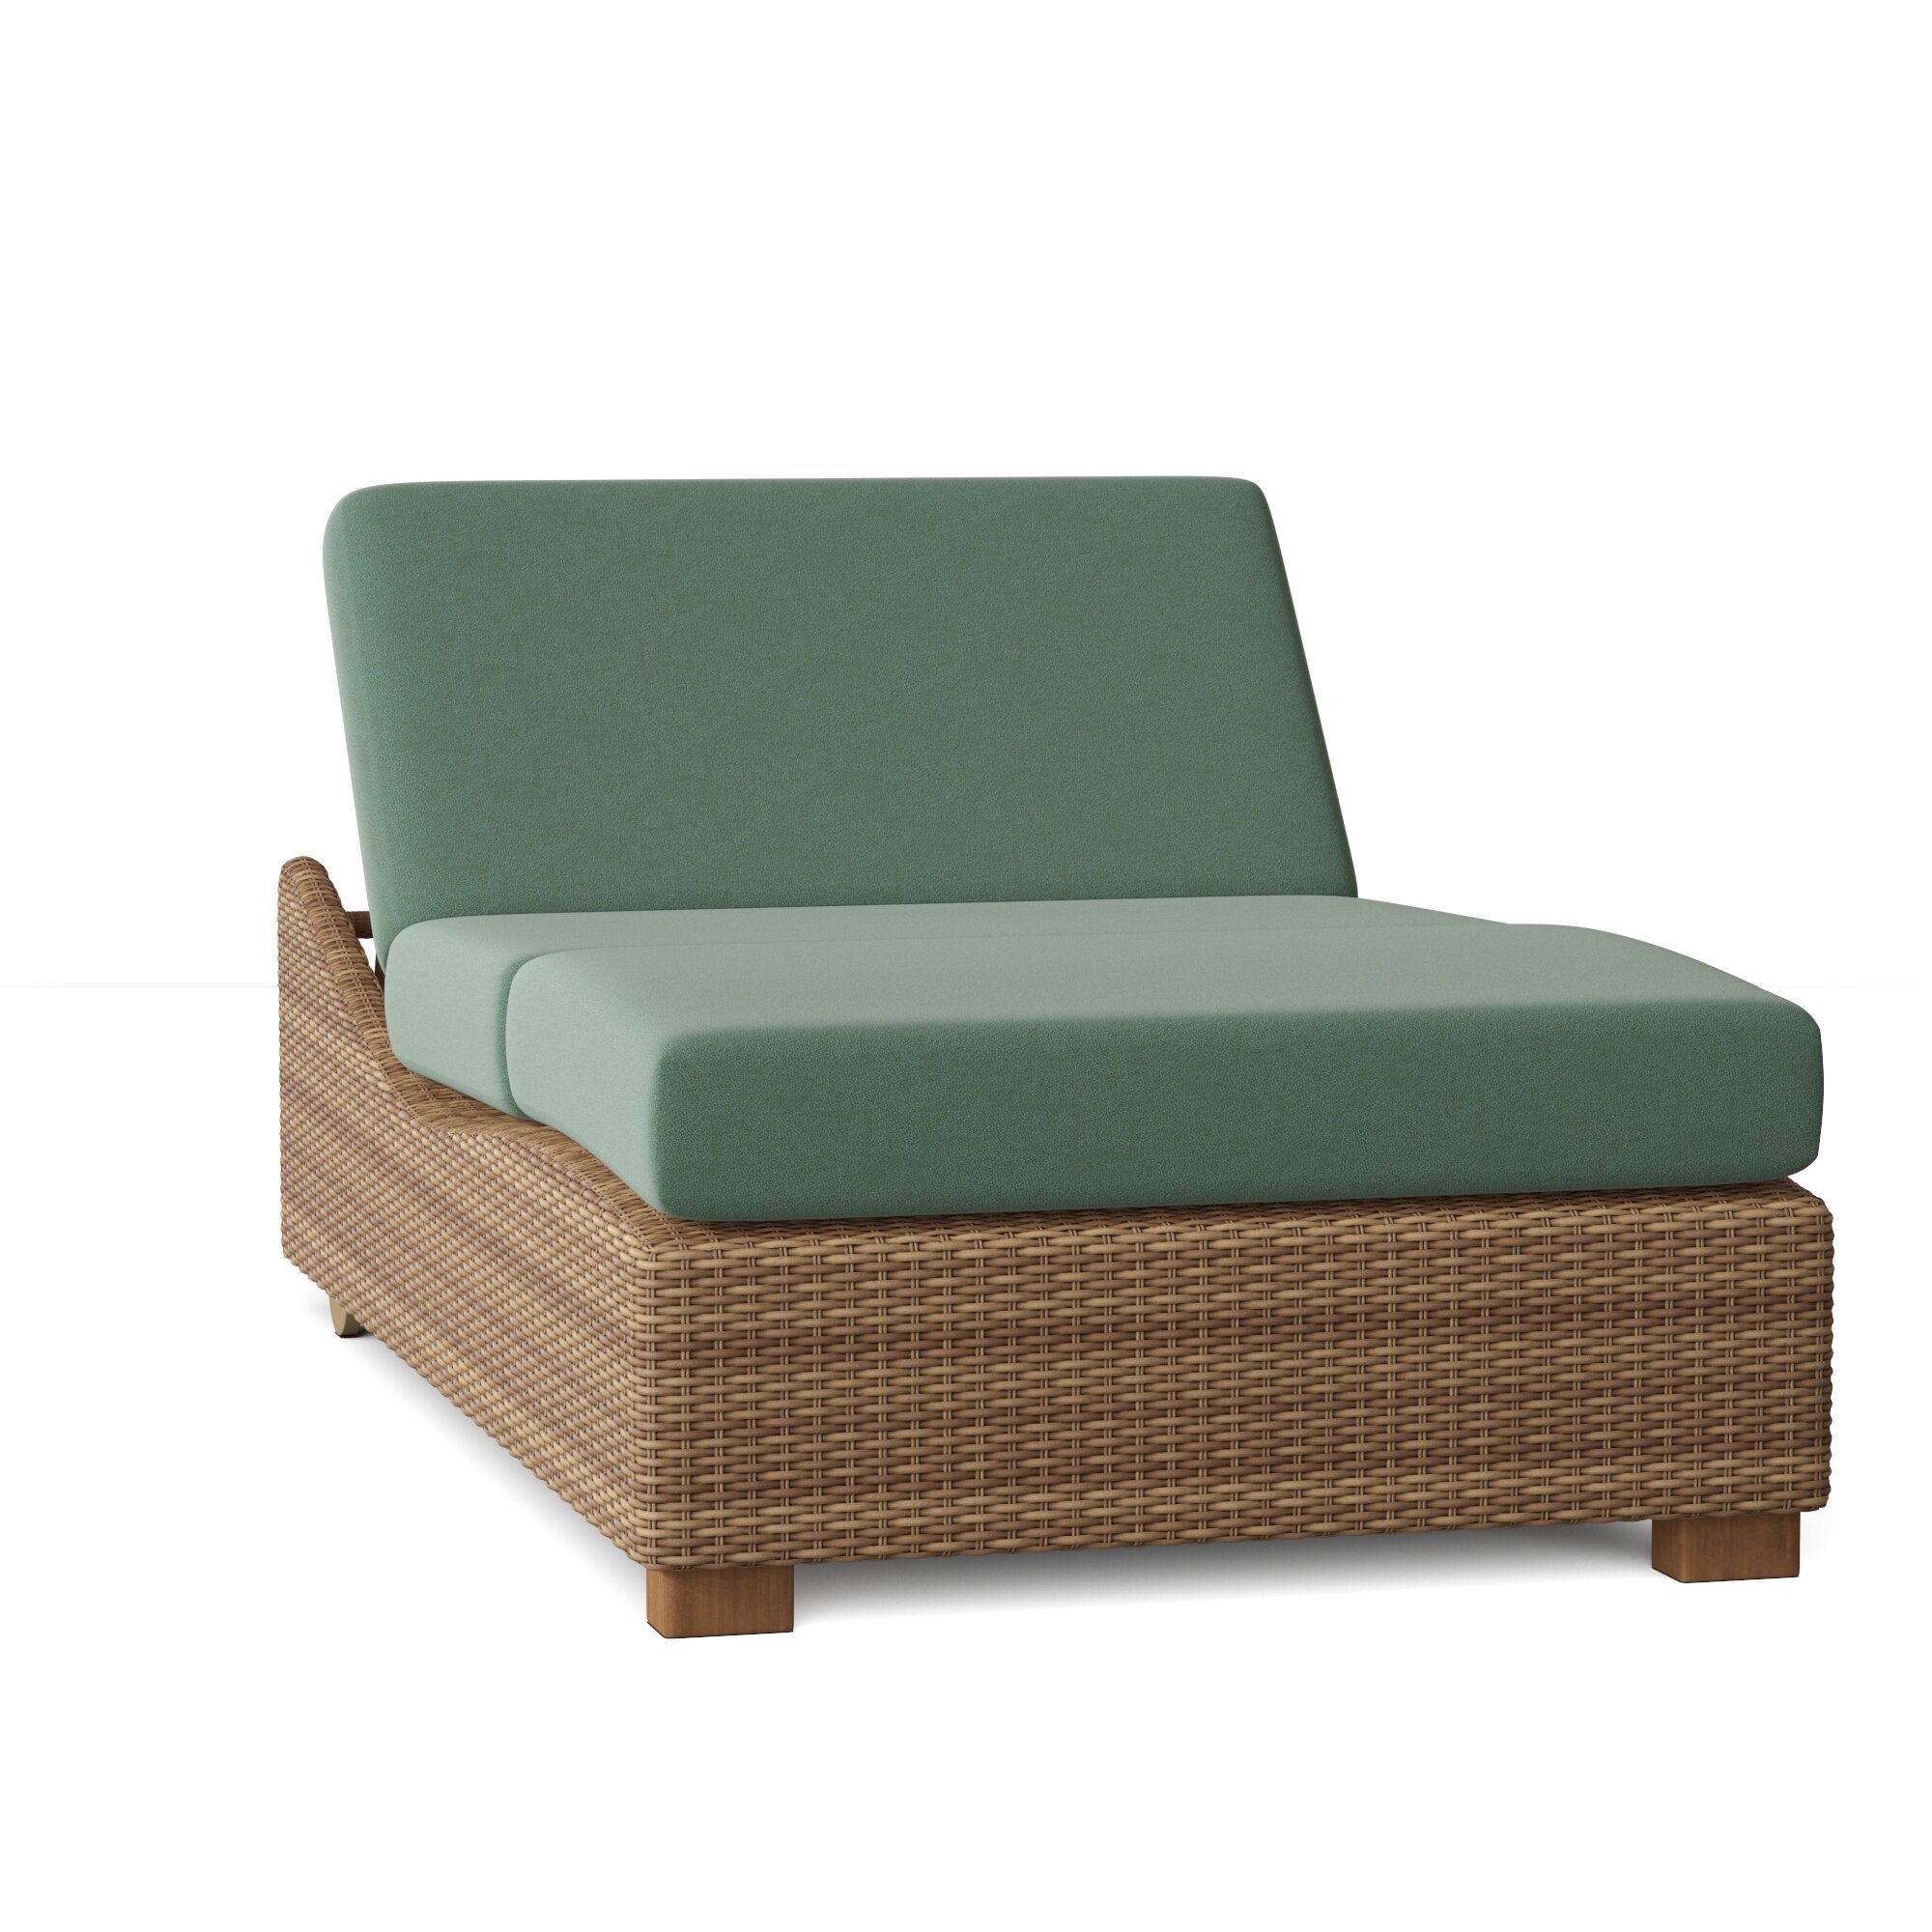 montecito double reclining chaise lounge with cushion